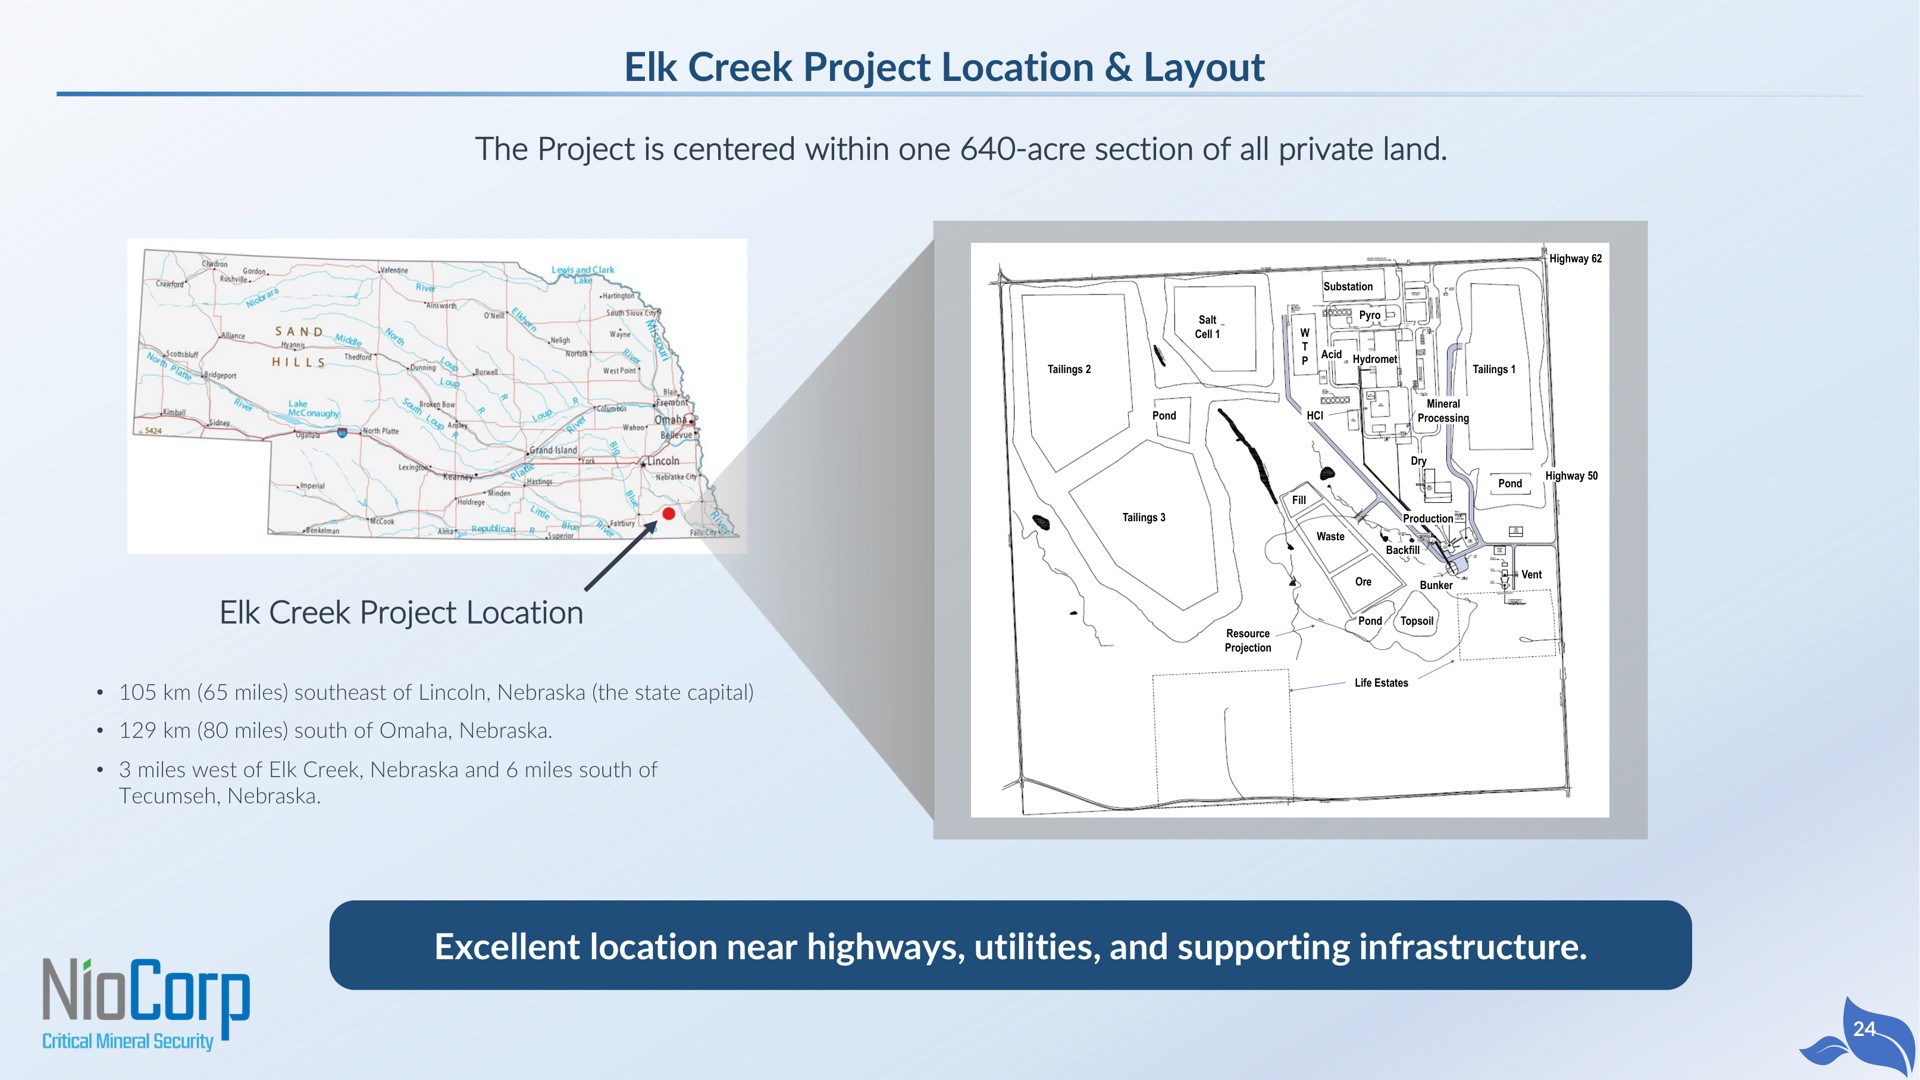 elk creek project location layout the project is centered within one acre section of all private land elk creek project location excellent location near highways utilities and supporting infrastructure | NioCorp